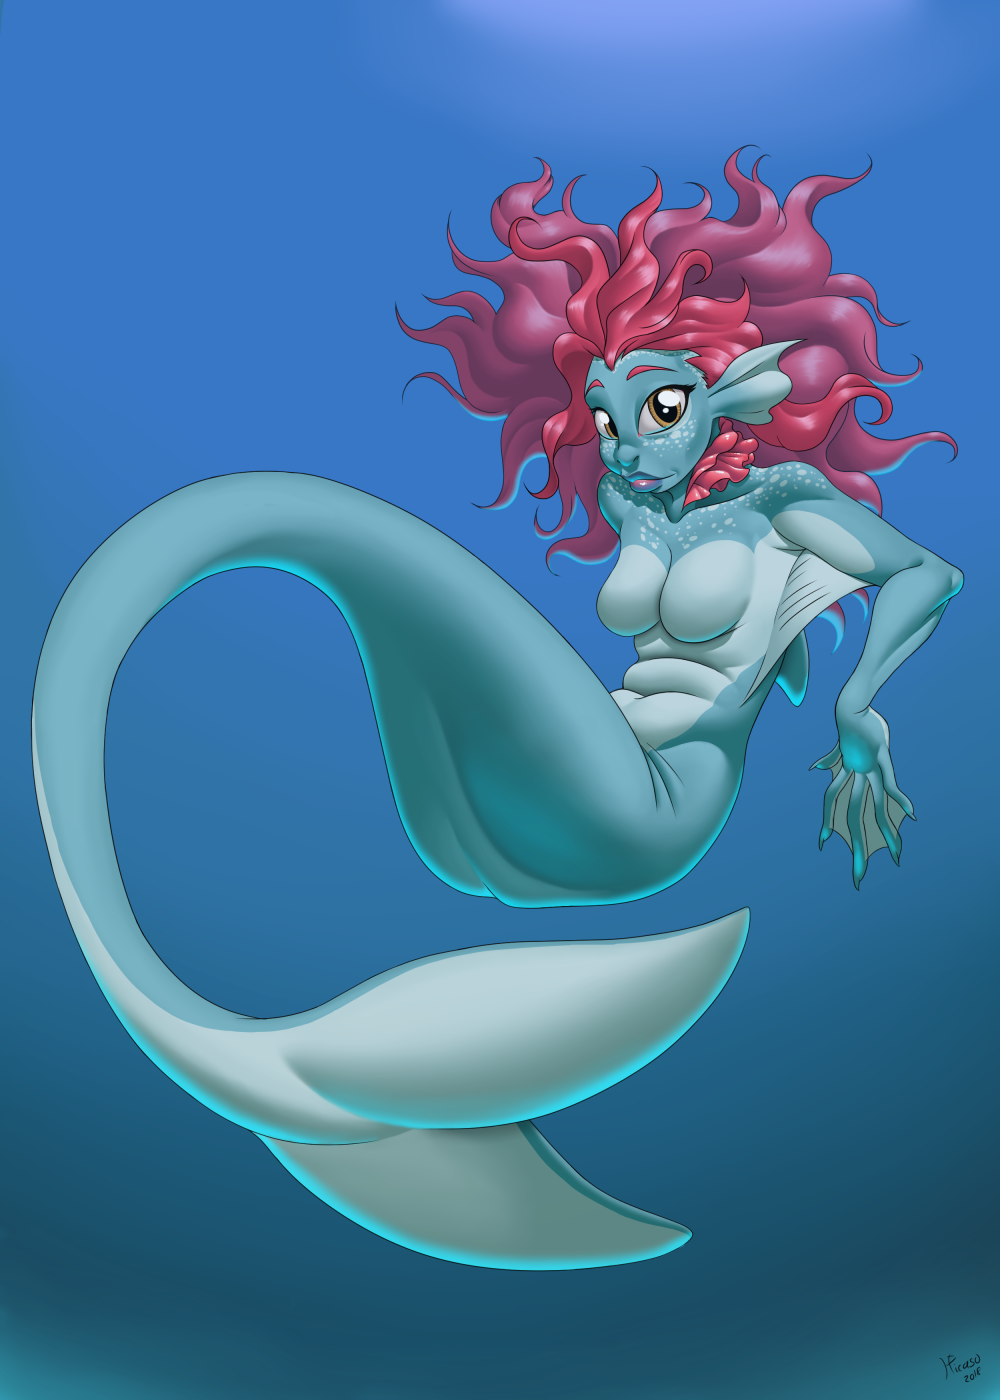 Most recent image: Mermay (2018)